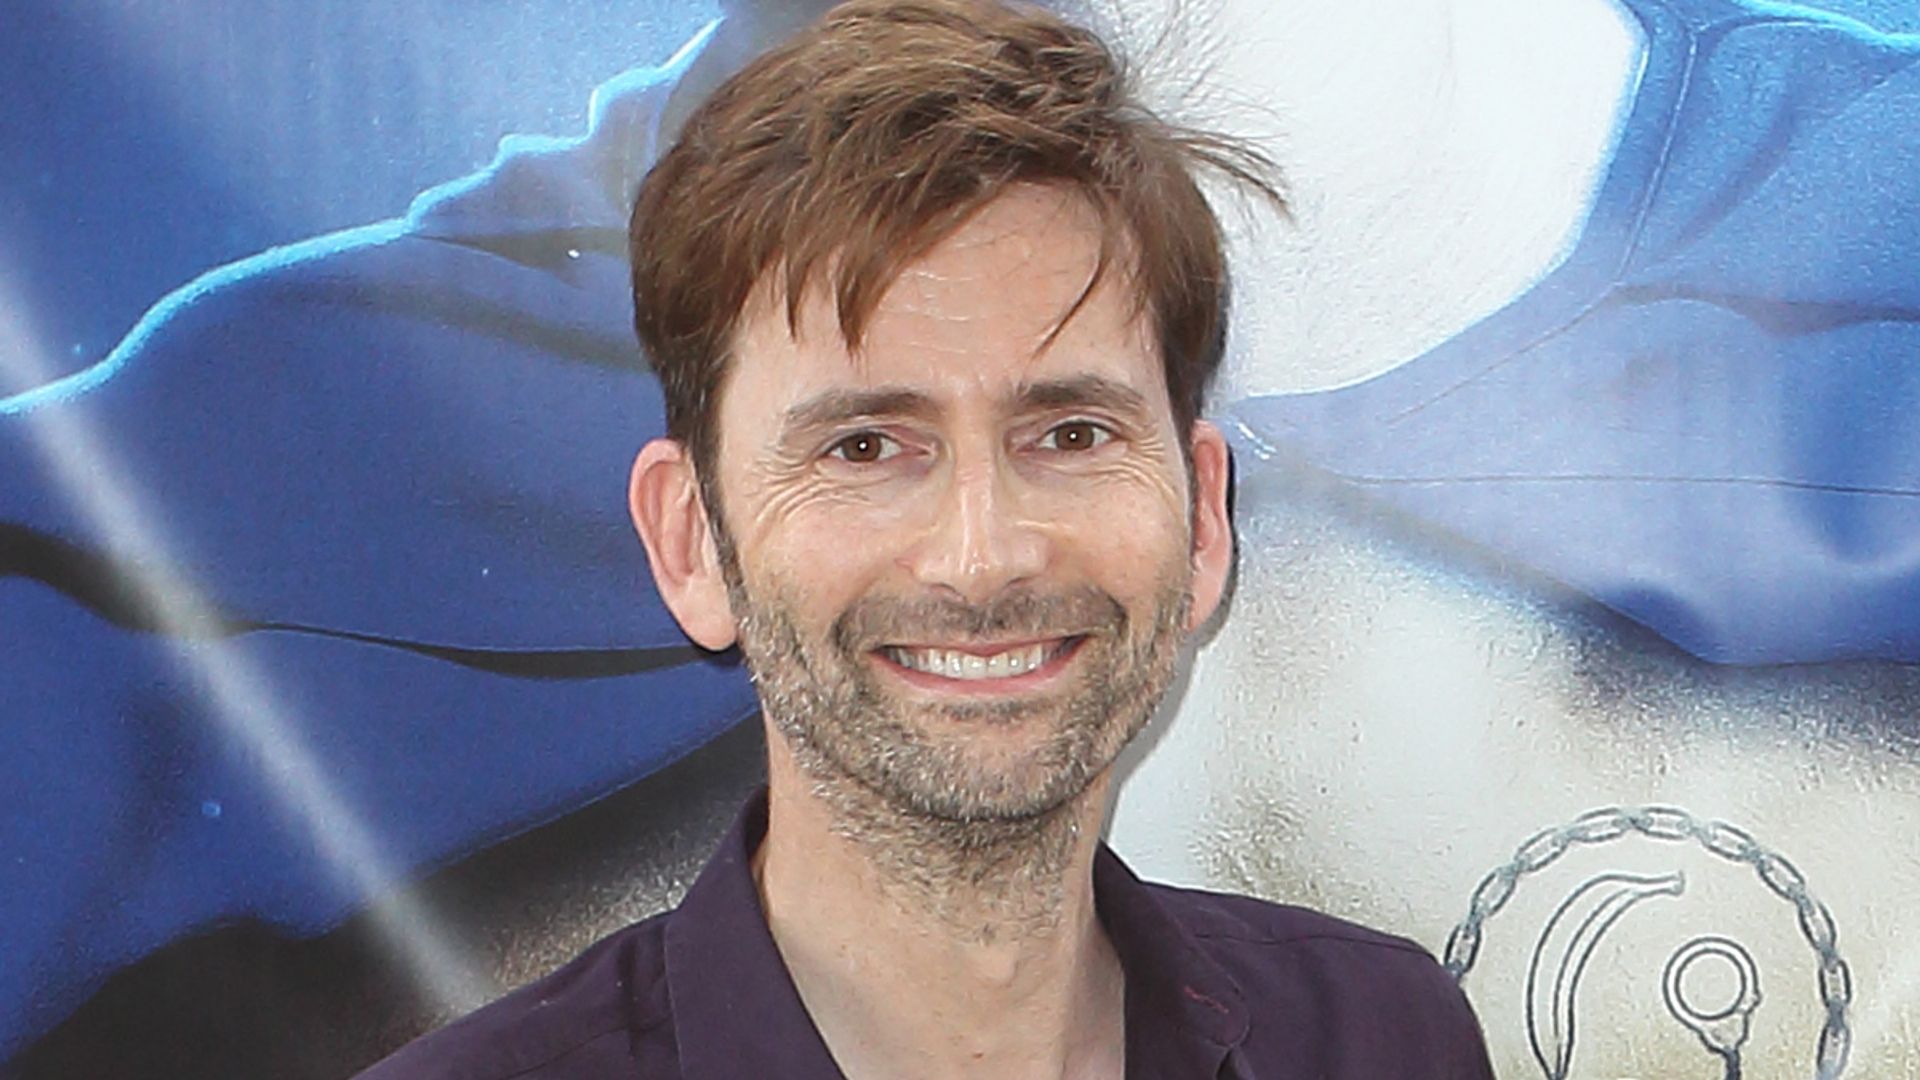 David Tennant's dramatic hair transformation by daughter, 3, leaves fans in stitches